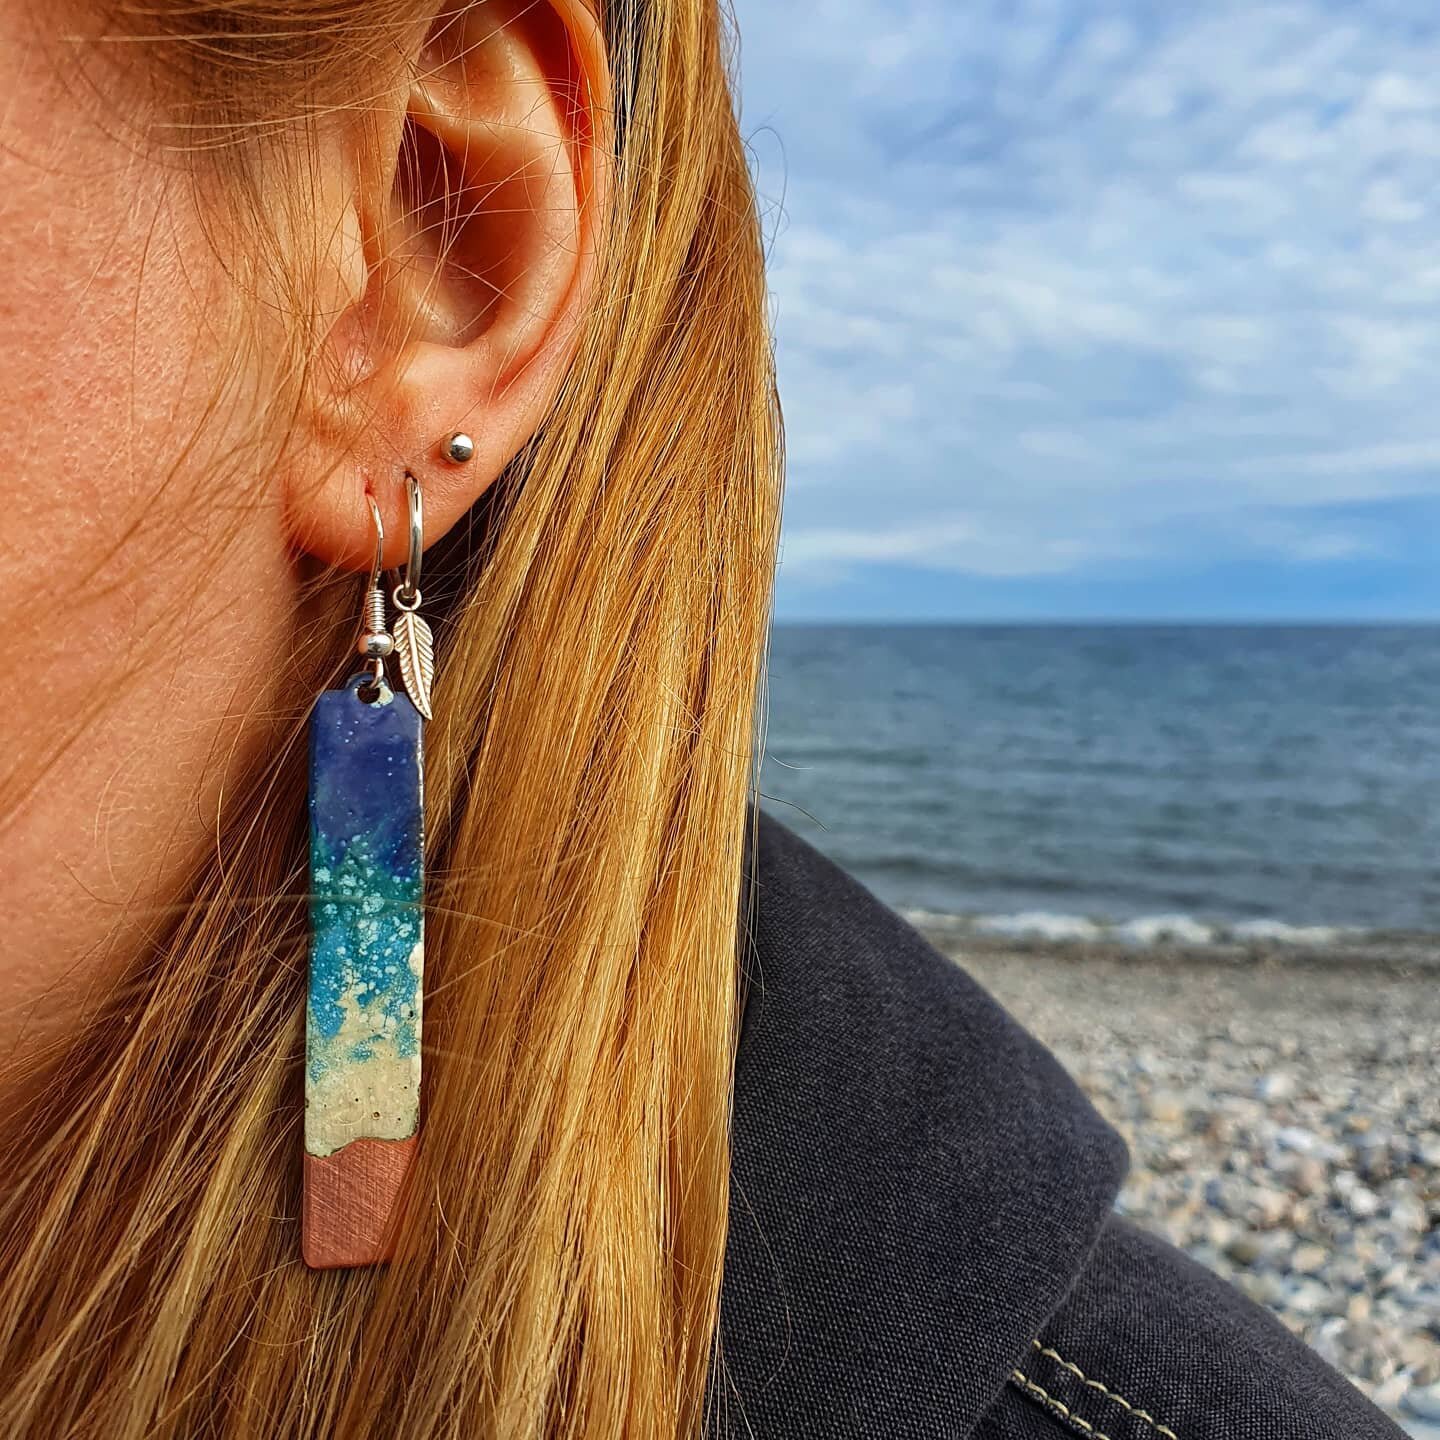 Seascape earrings modelled by the lovely Sadie by the actual sea!